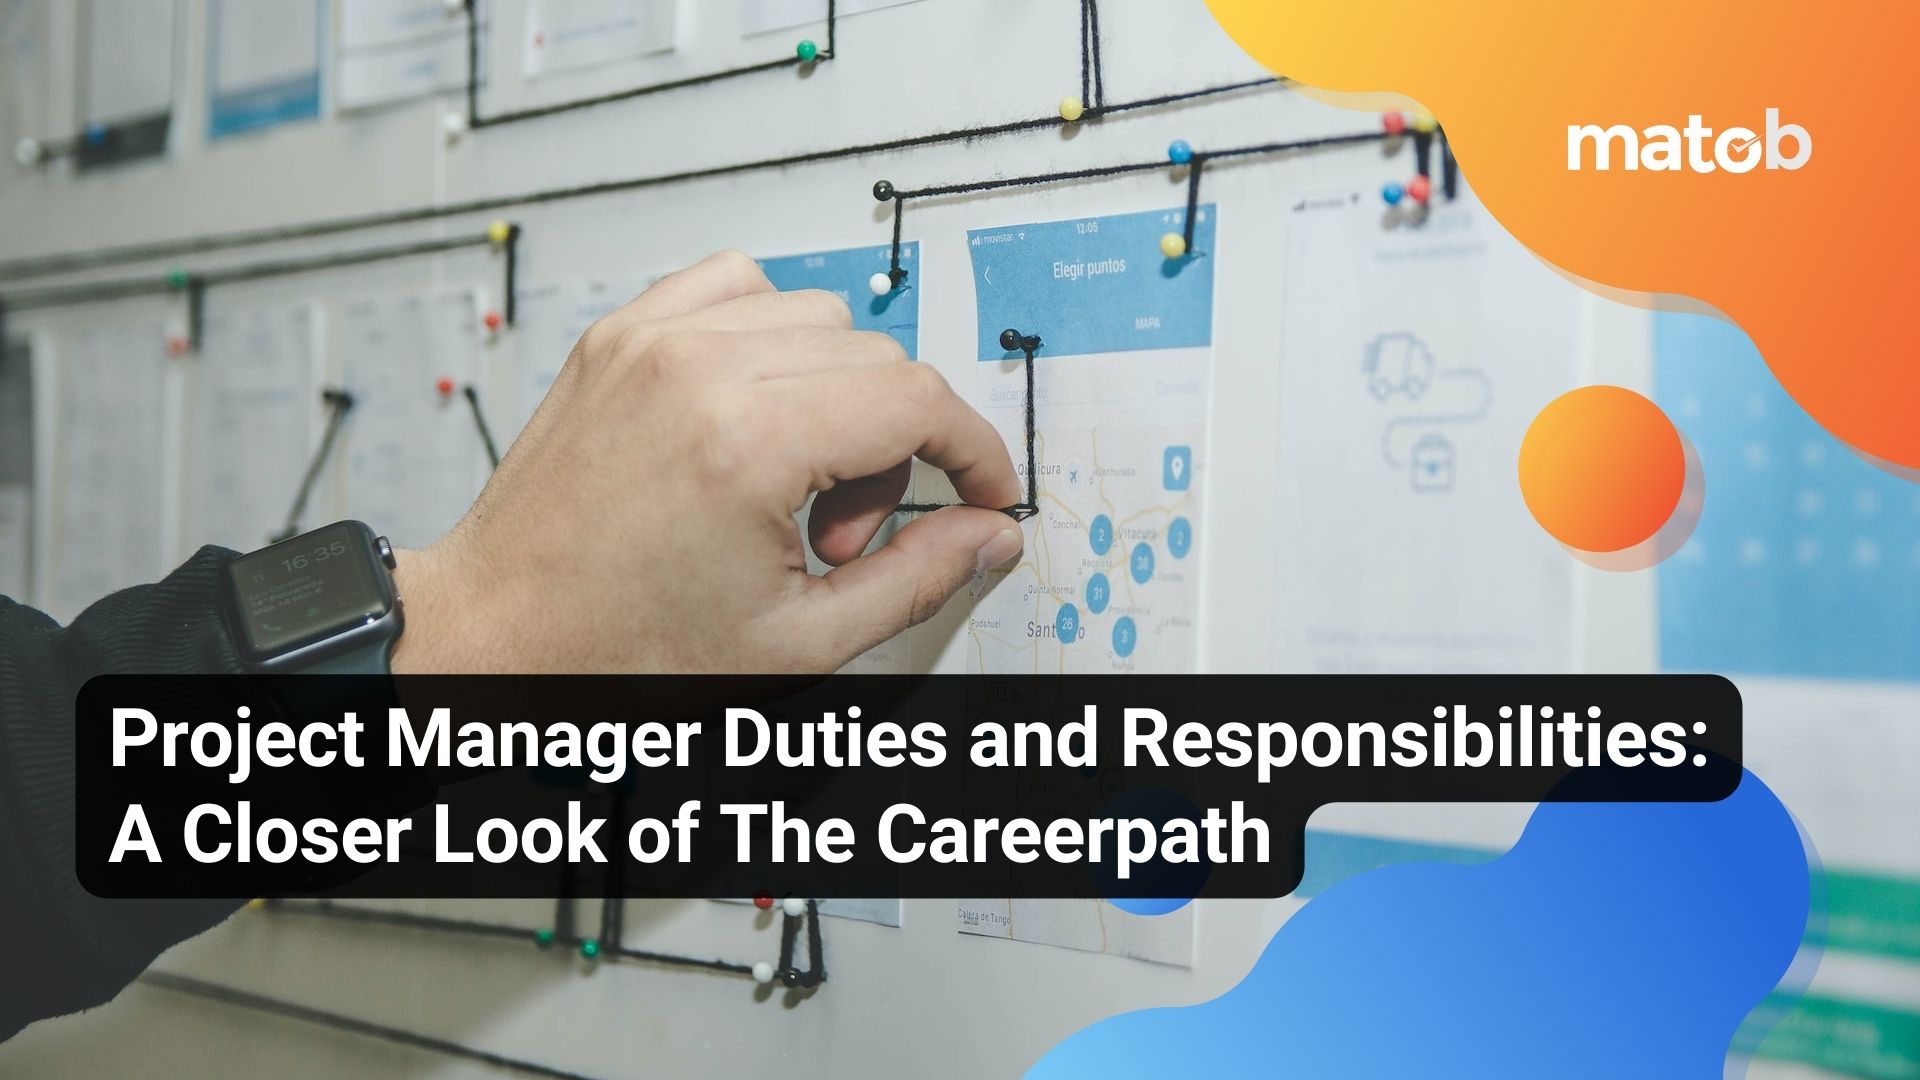 Project Manager Duties and Responsibilities: A Closer Look of The Careerpath